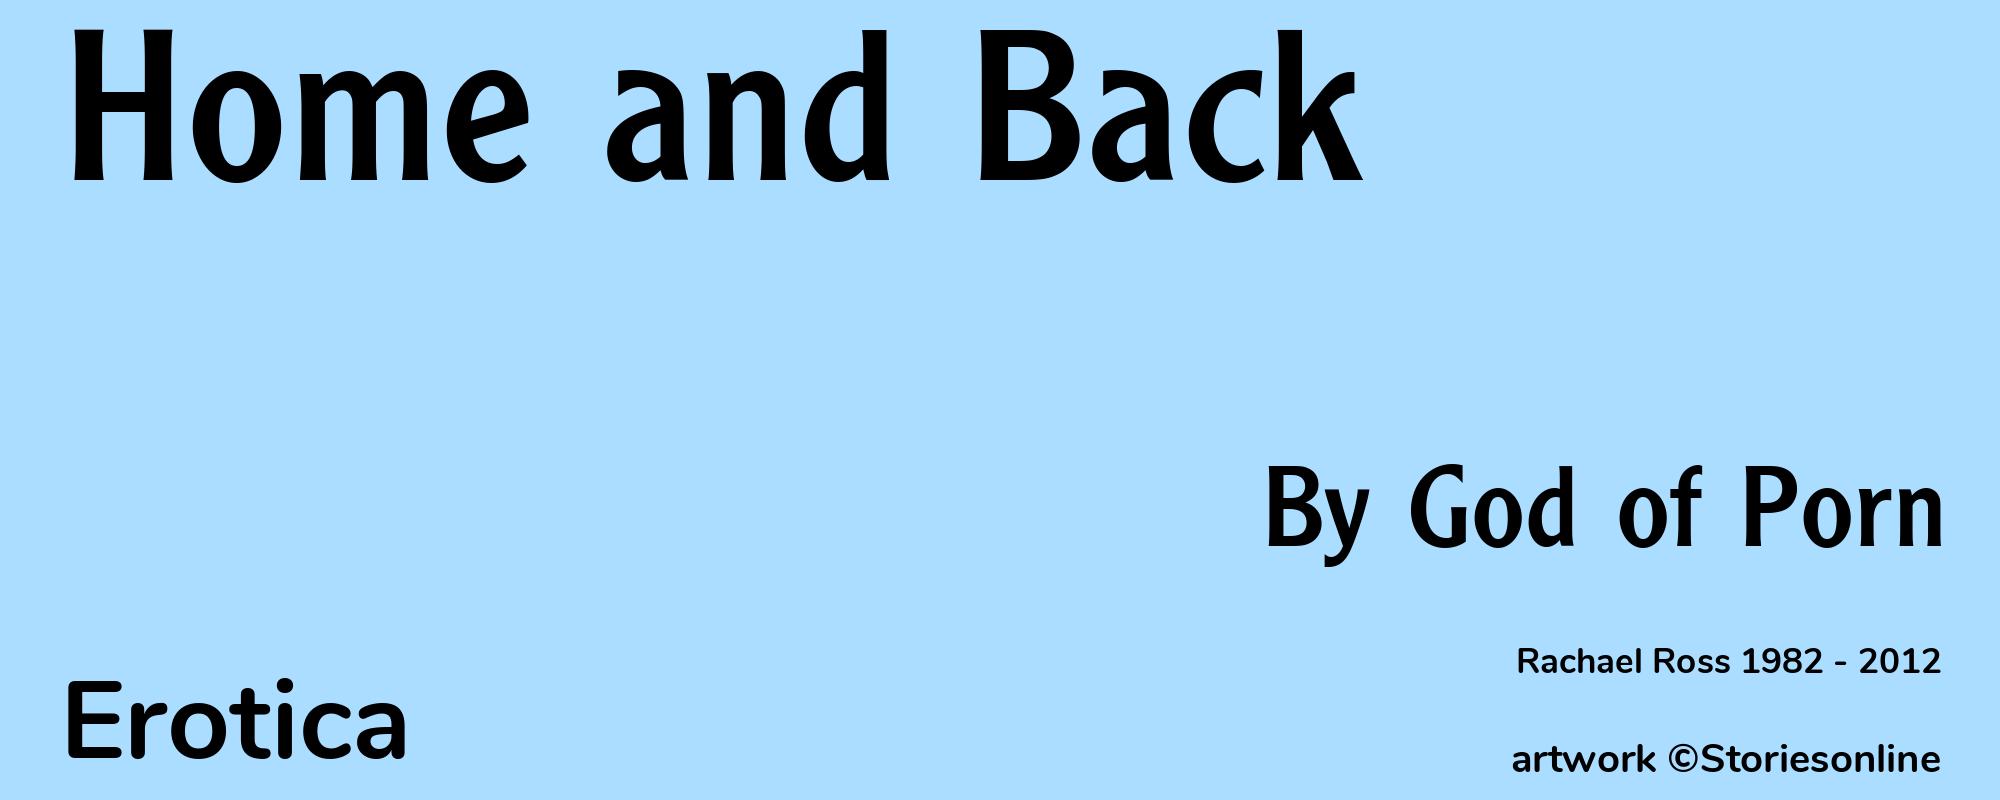 Home and Back - Cover